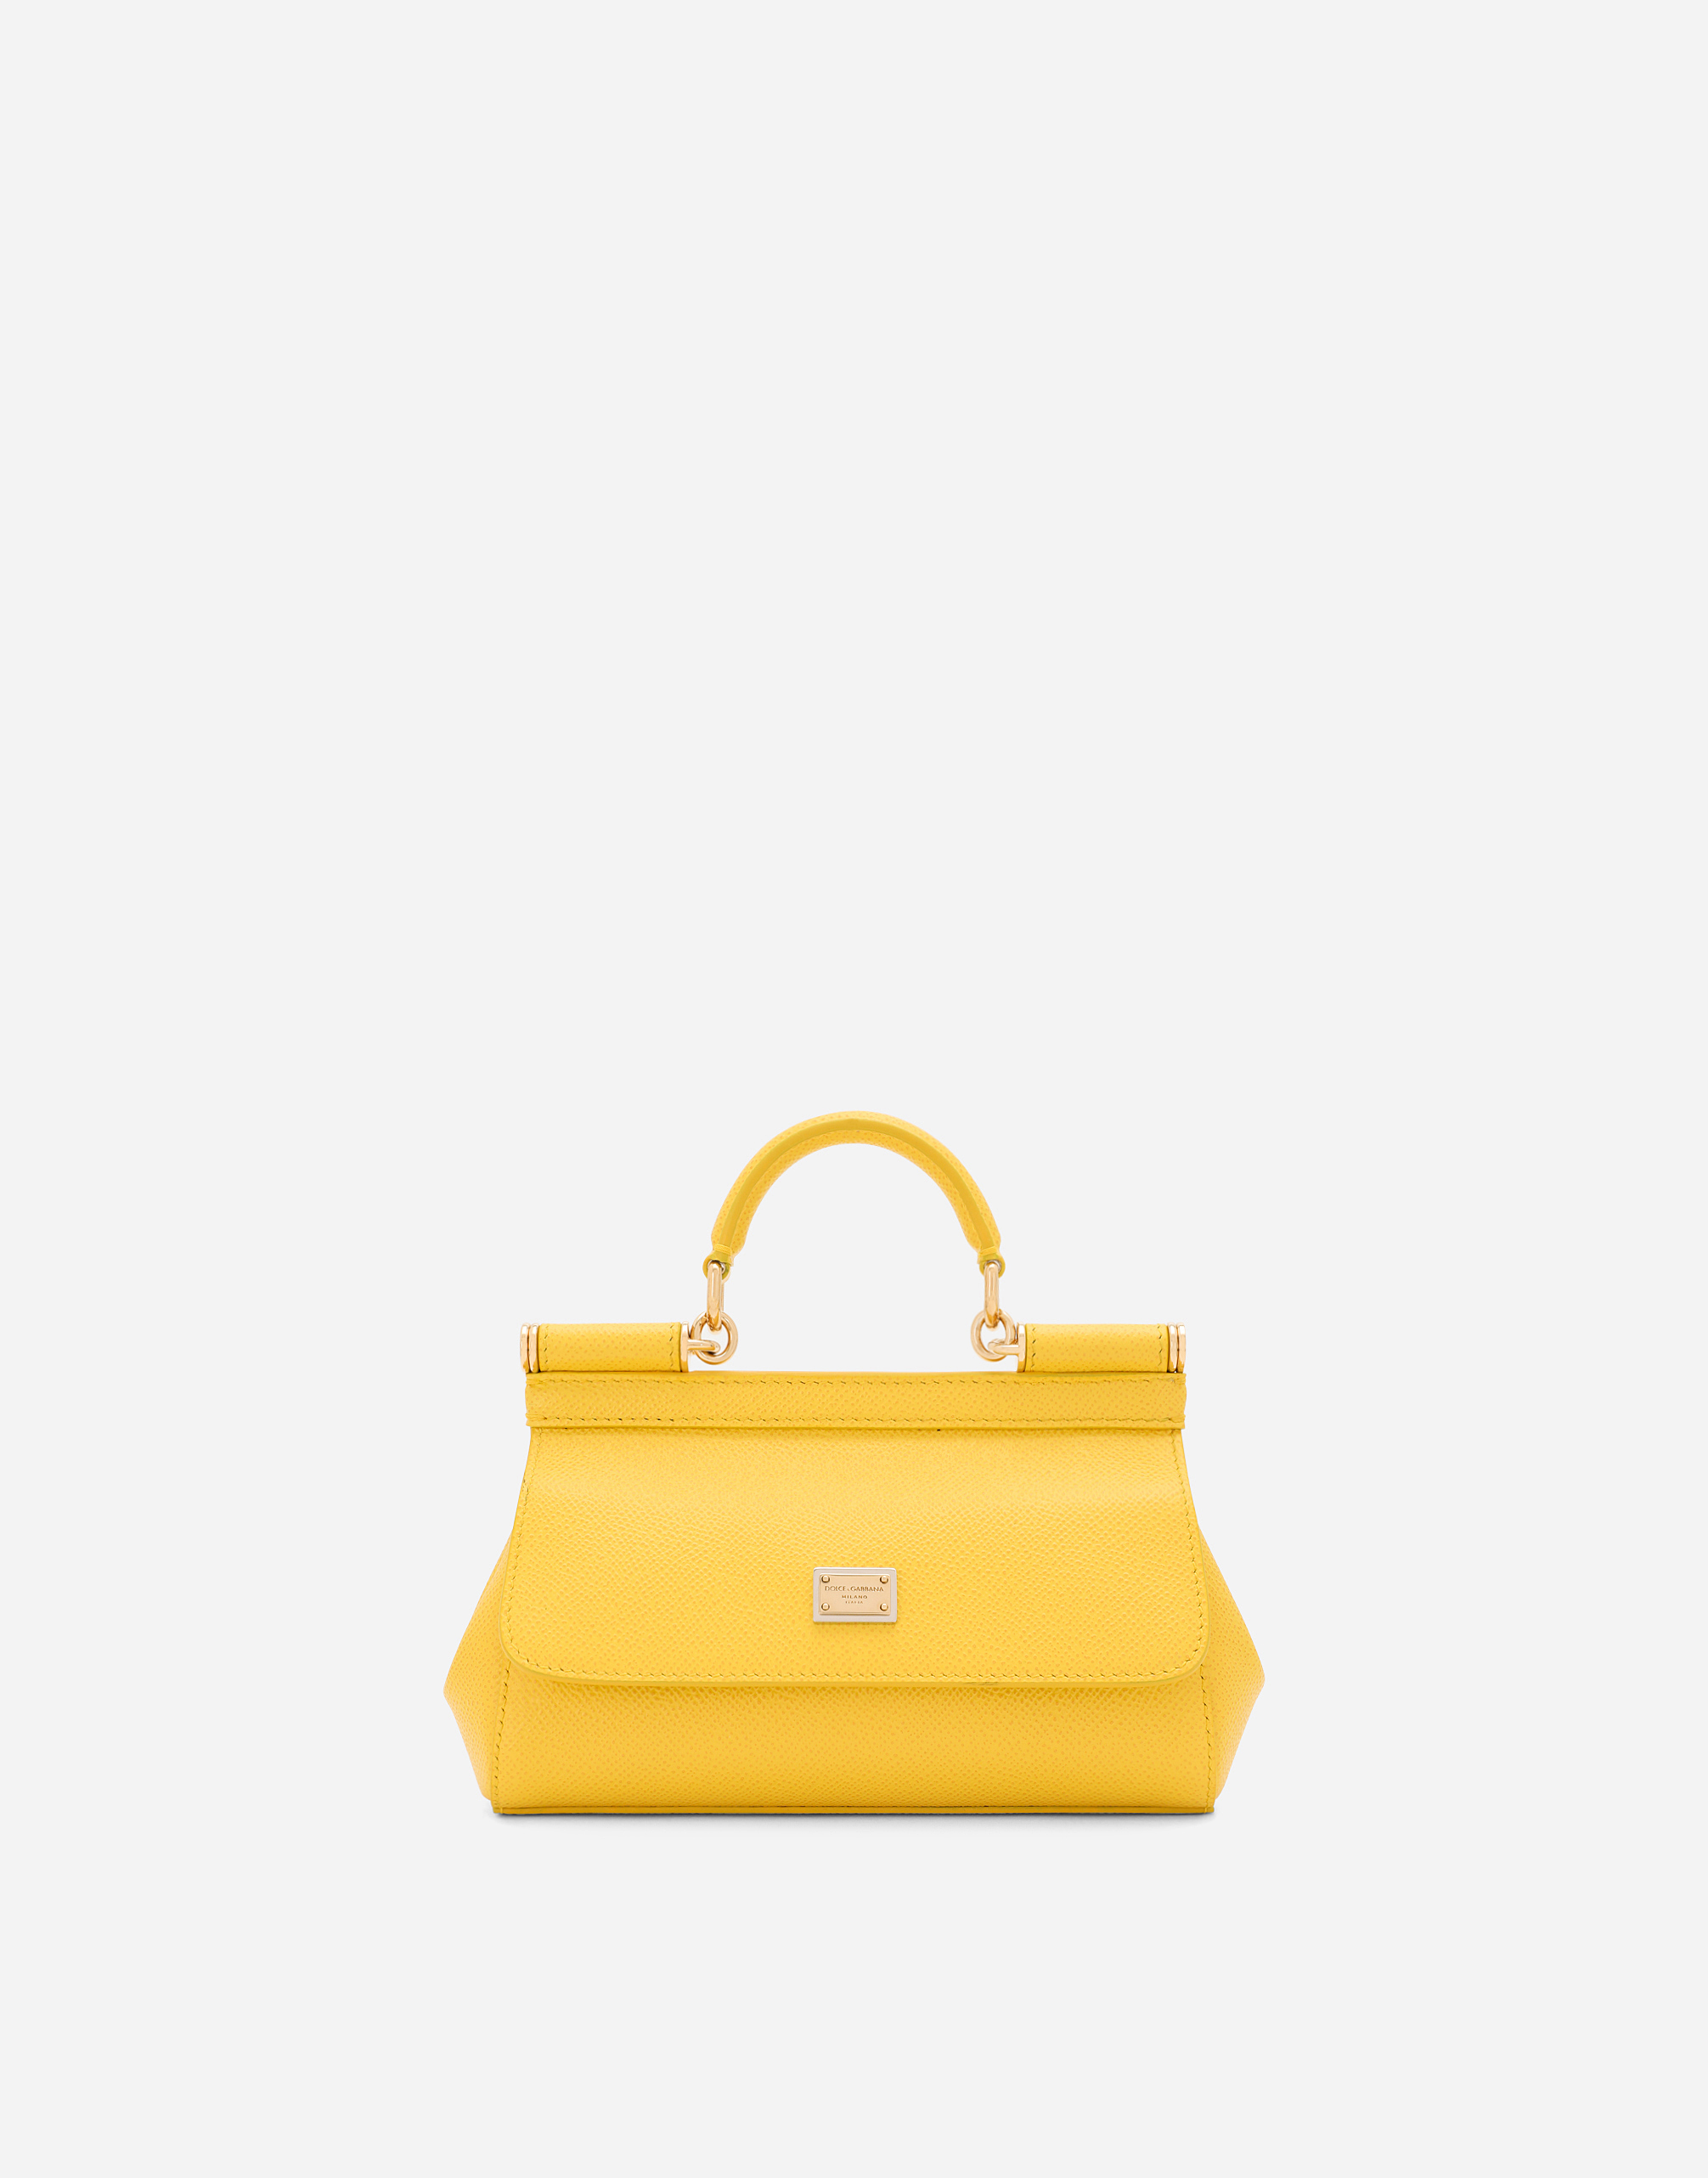 Dolce & Gabbana Devotion Embellished Small Tote Bag in Yellow